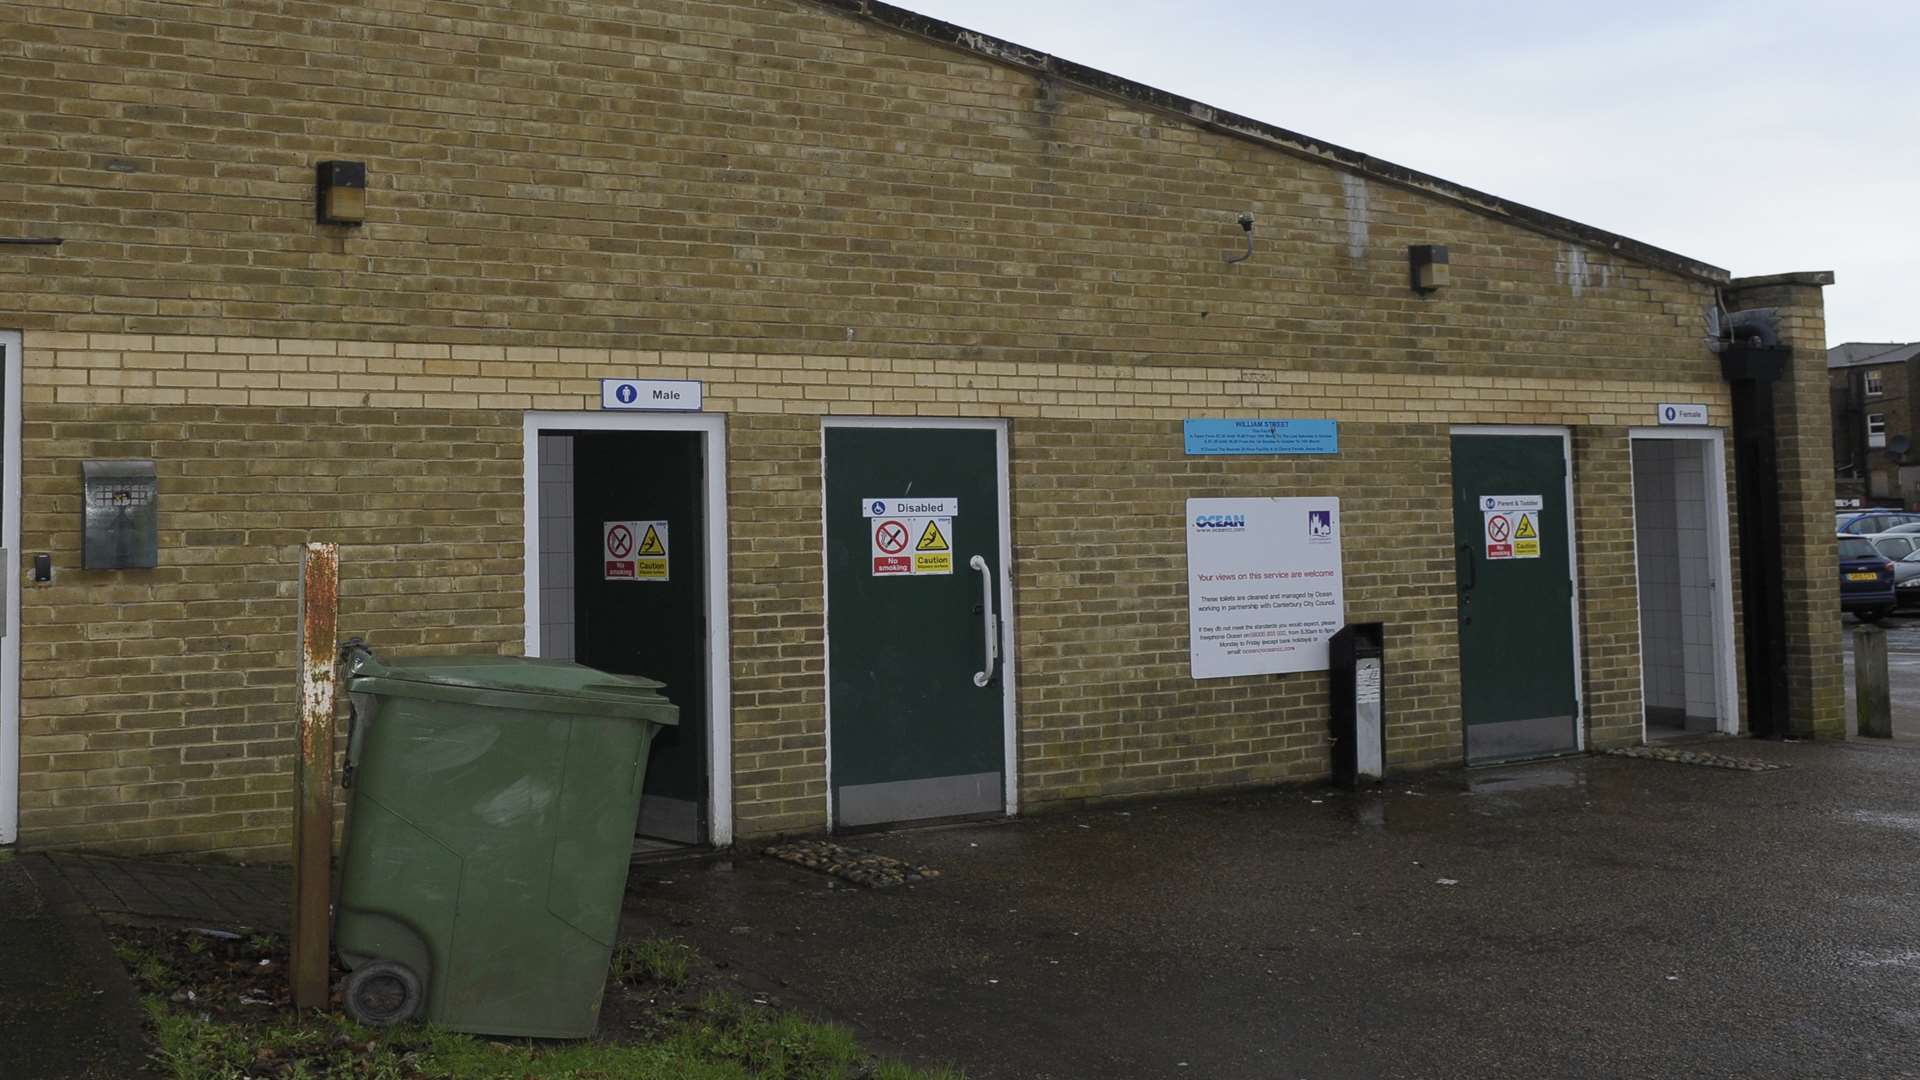 A council spokesperson said drug taking in facilities like the council toilets is a "sad reality"